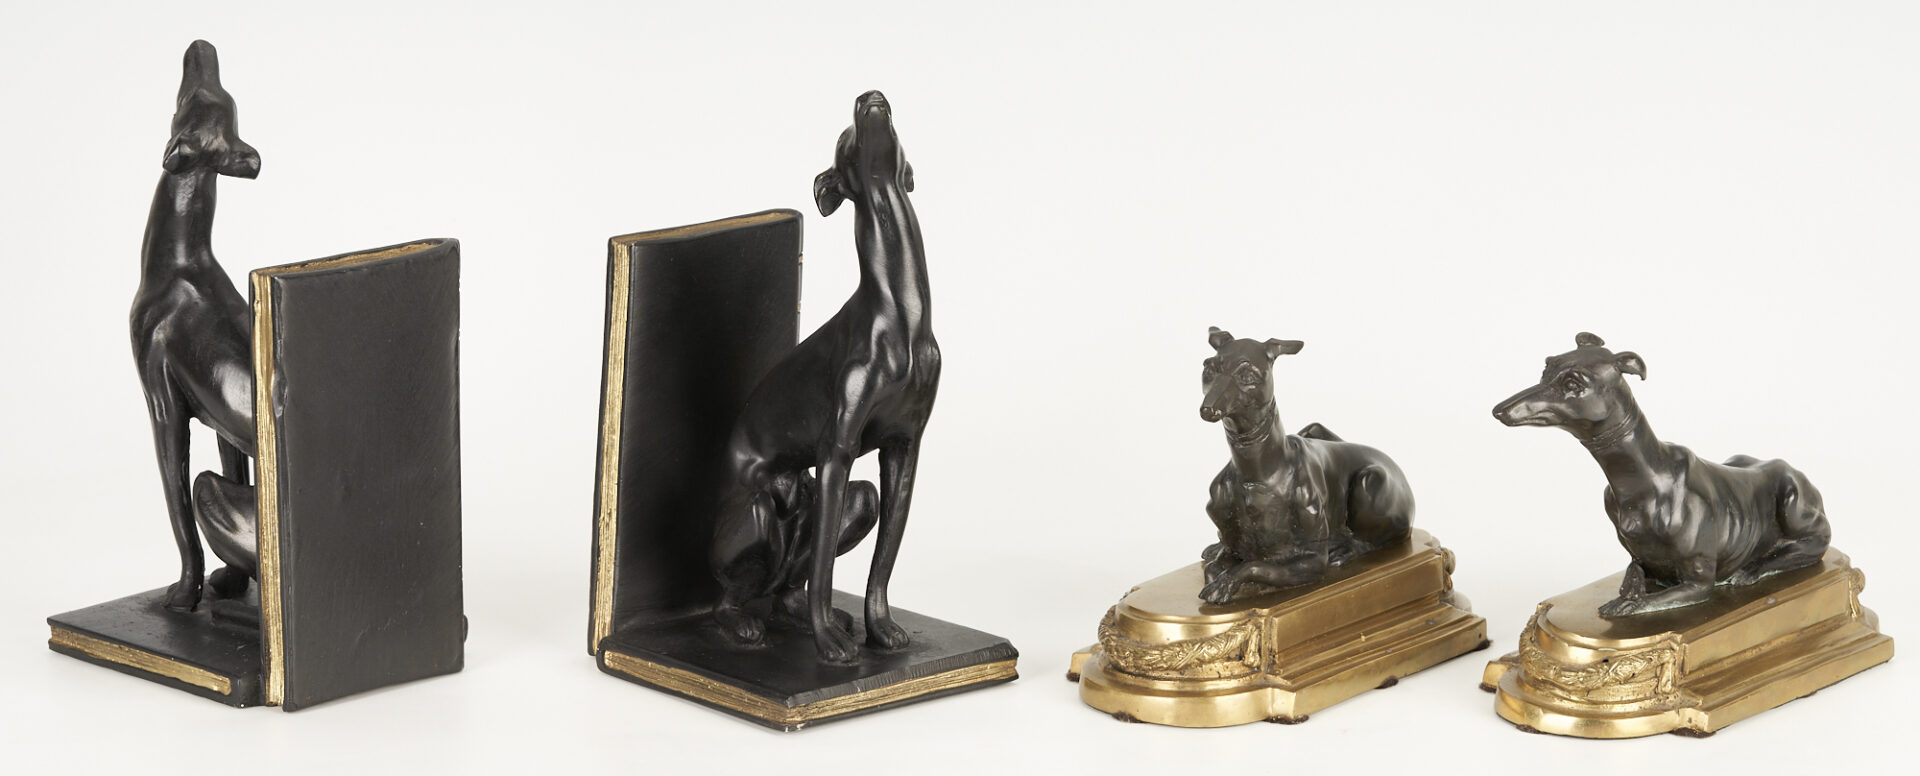 Lot 682: 2 Pairs of Whippet Bookends